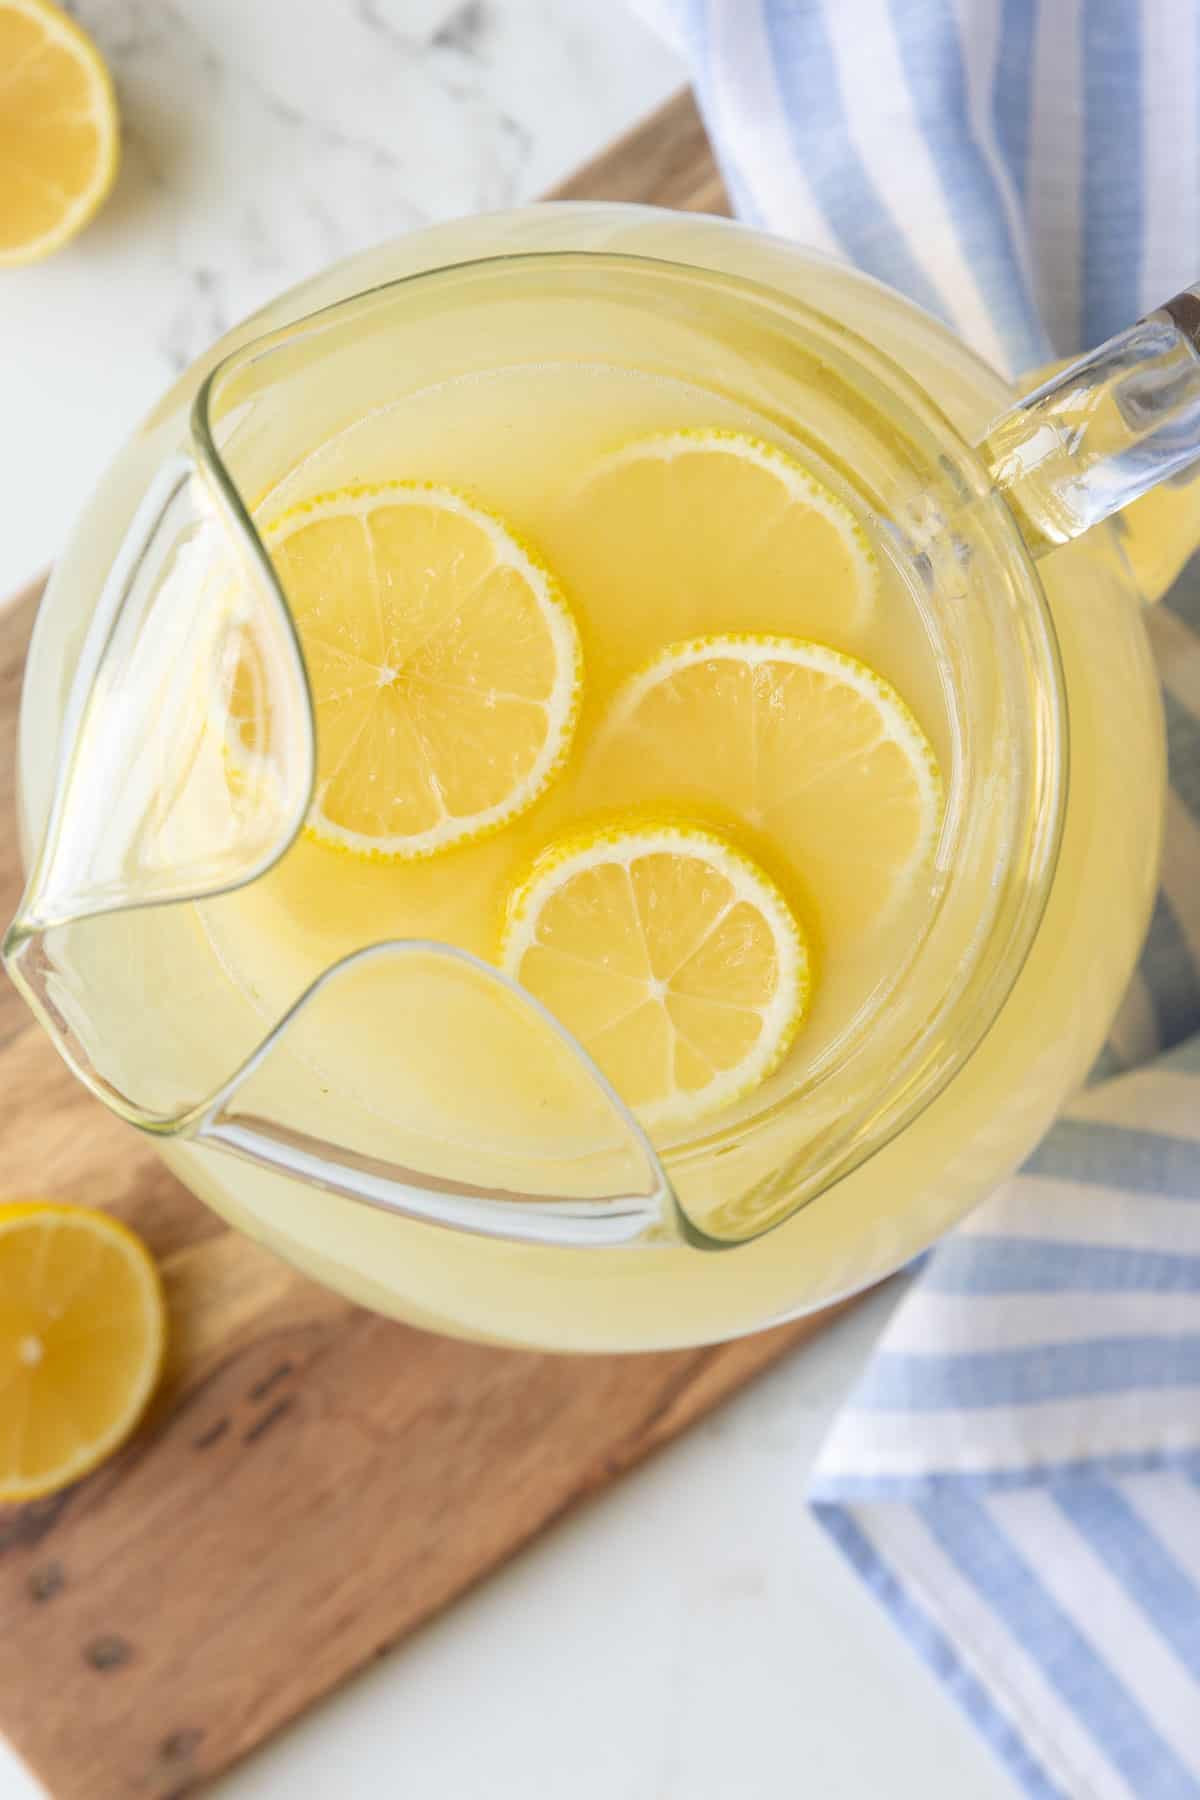 Overhead view of a pitcher of homemade lemonade with lemon slices.